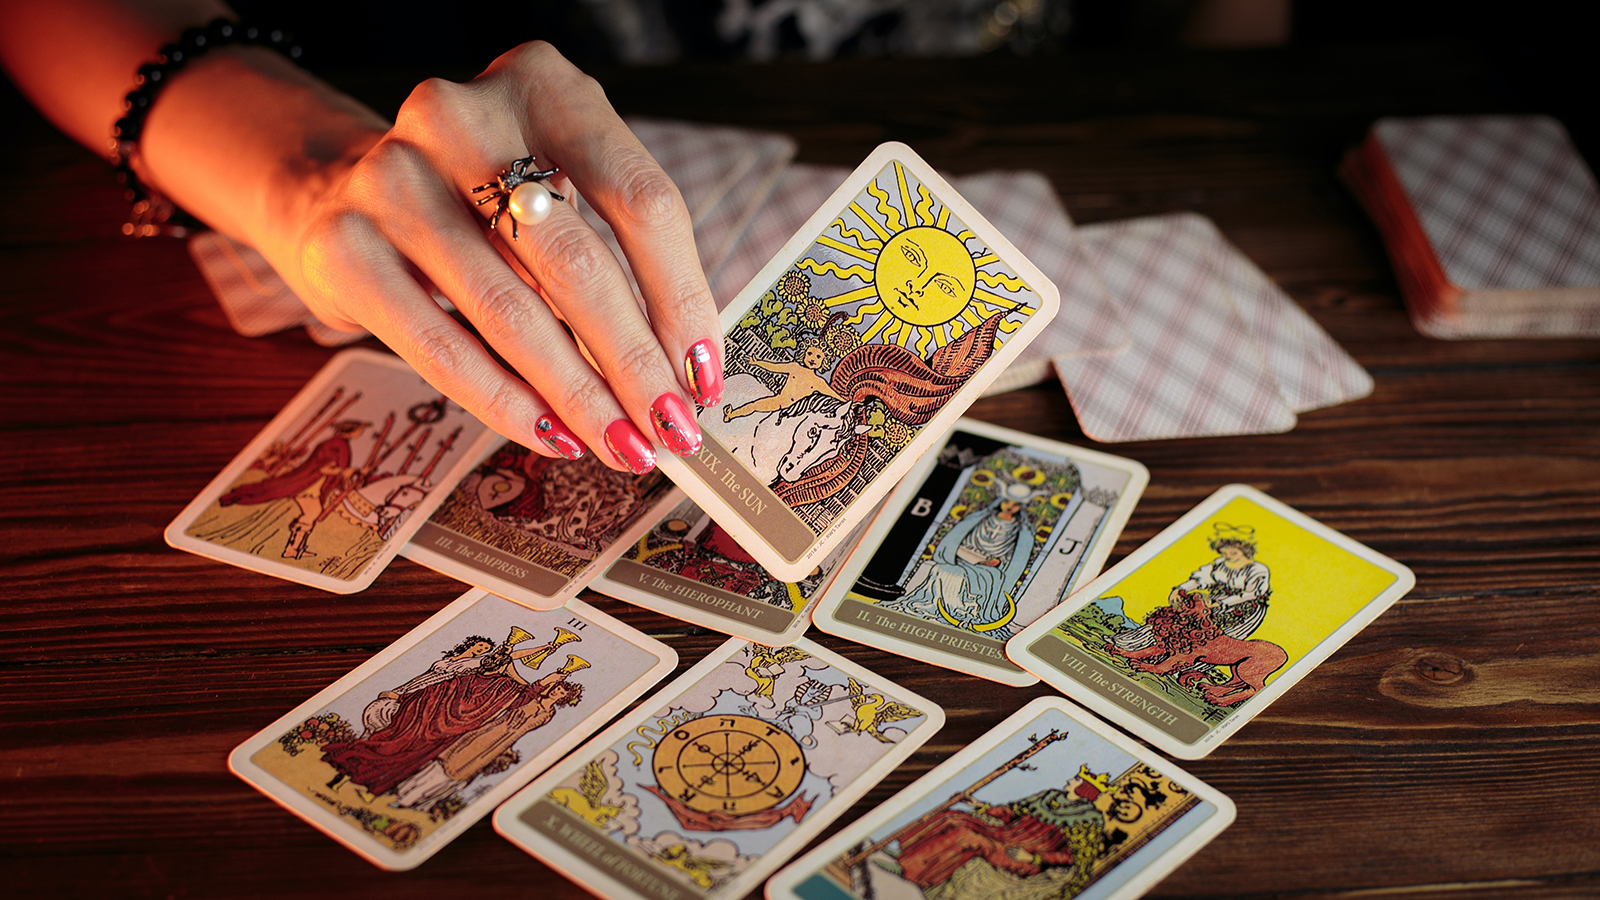 A woman displays tarot cards. Photo by Petr Sidorov/Unsplash/Creative Commons